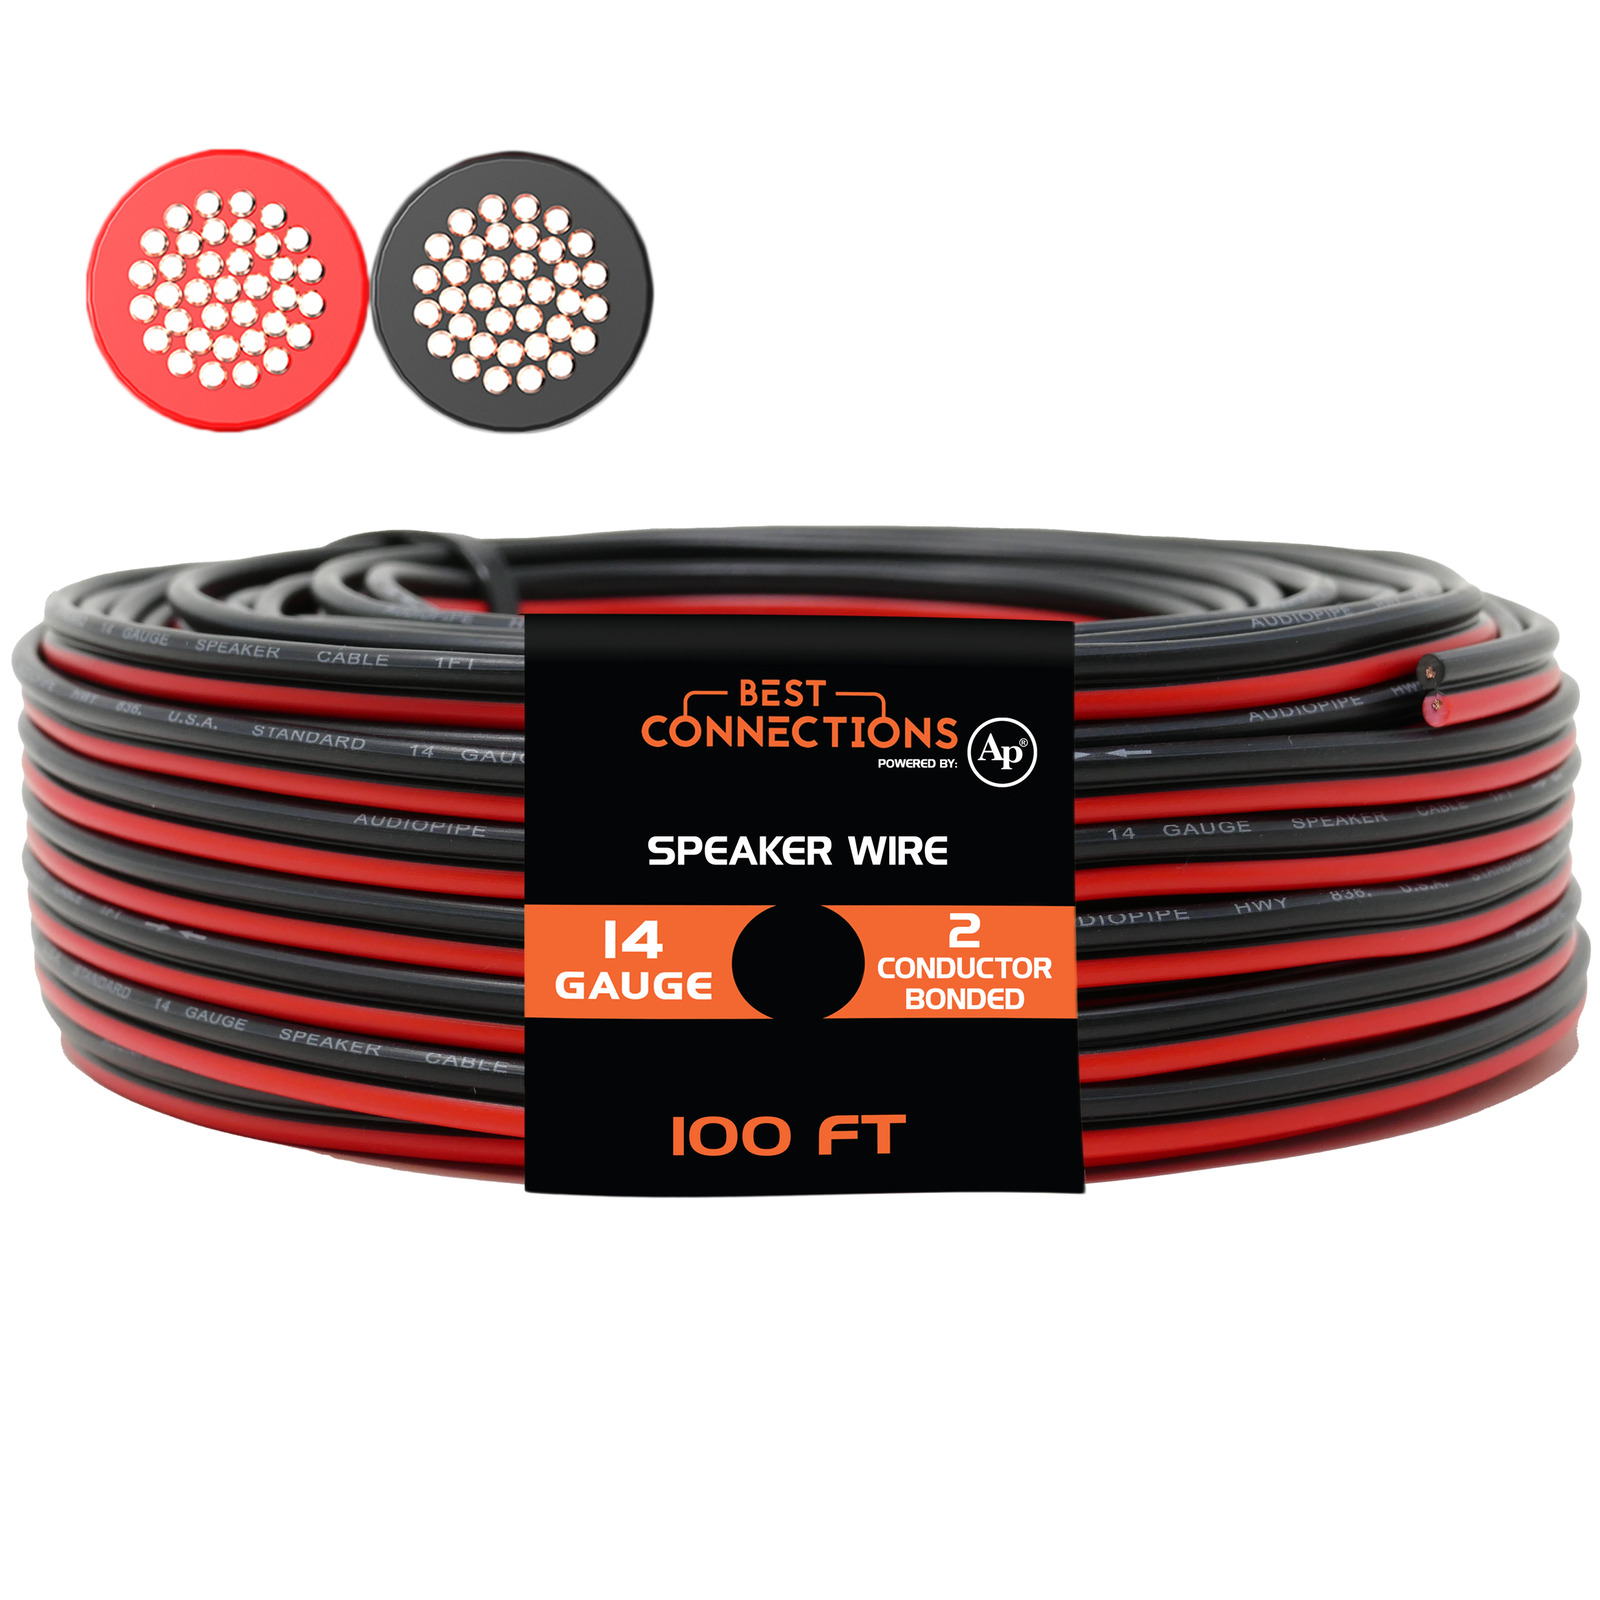 14 Gauge 100 Feet Speaker Wire Red Black Zip Cable Copper Clad Car Stereo